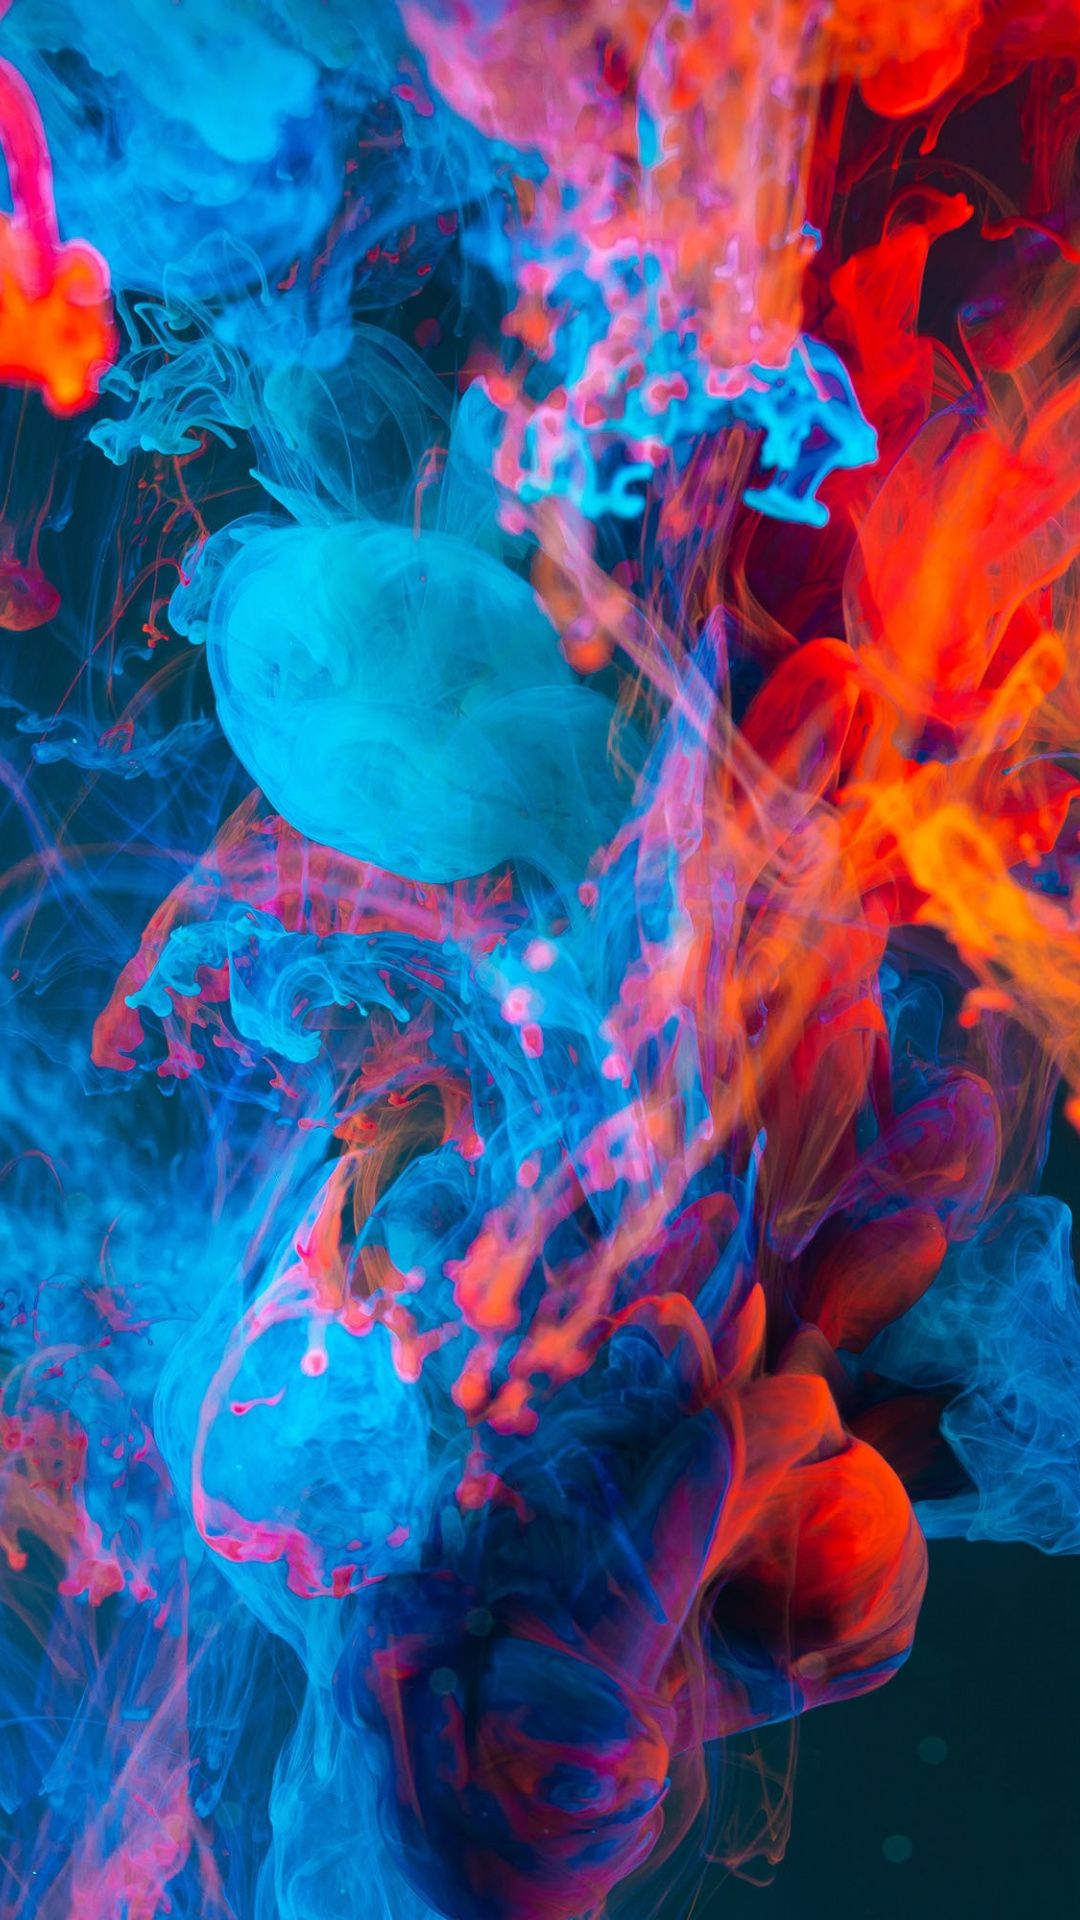 Abstract Crazy Iphone Wallpaper Tumblr - Abstract Phone Wallpaper Hd -  1080x1920 Wallpaper 